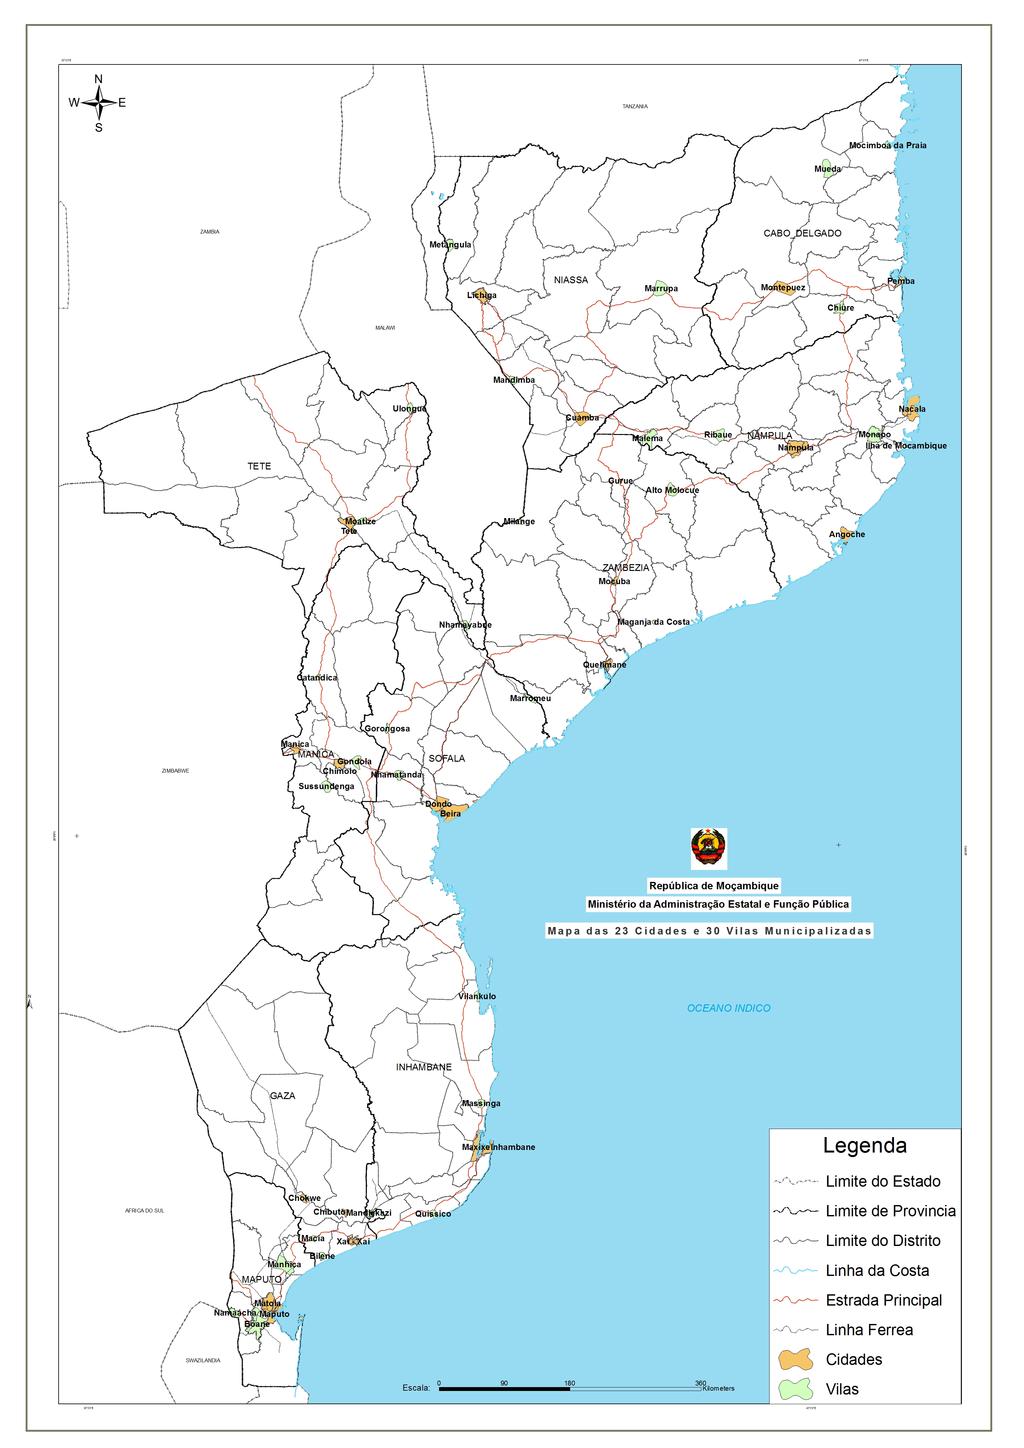 Urbanisation in Mozambique 53 municipios are considered urban areas Every 5 year the number of urban areas will increase There is no